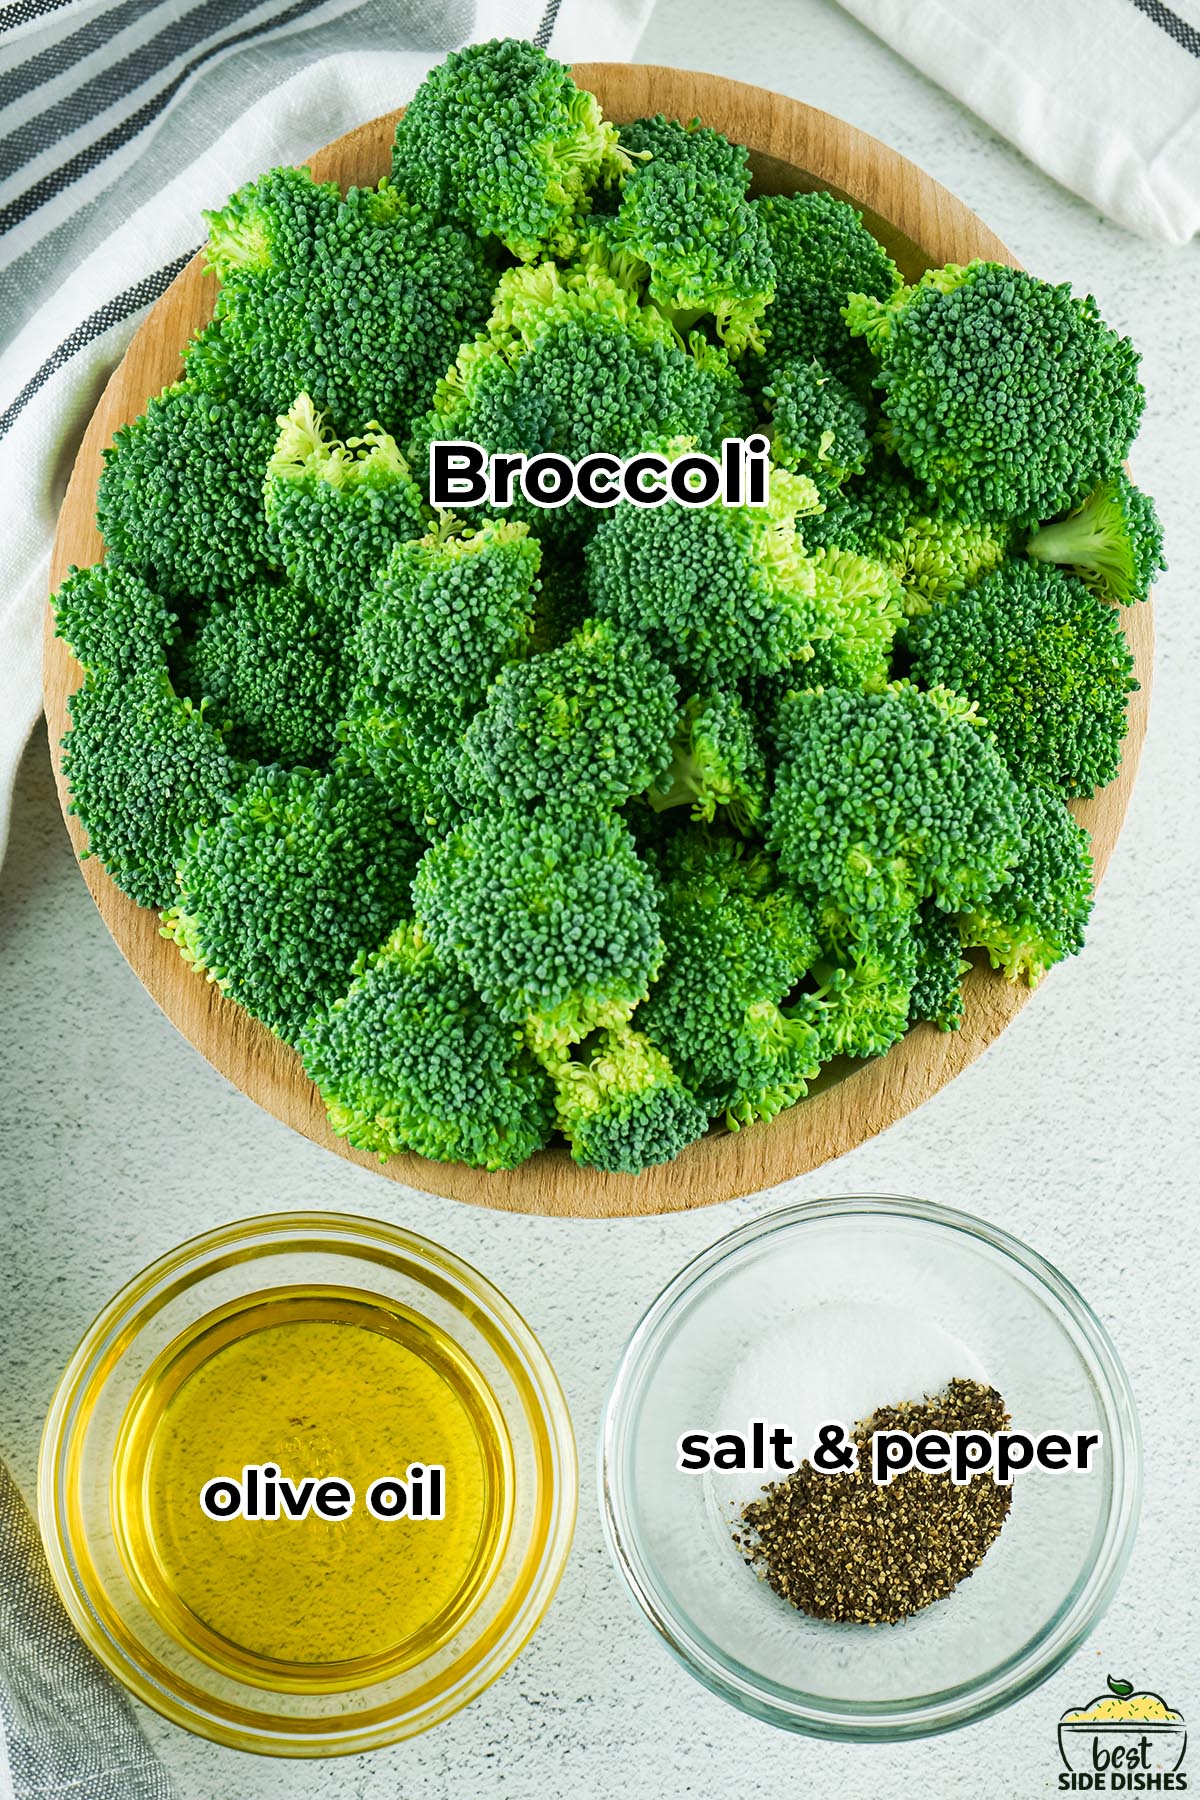 all of the ingredients for air fryer broccoli in separate bowls with labels